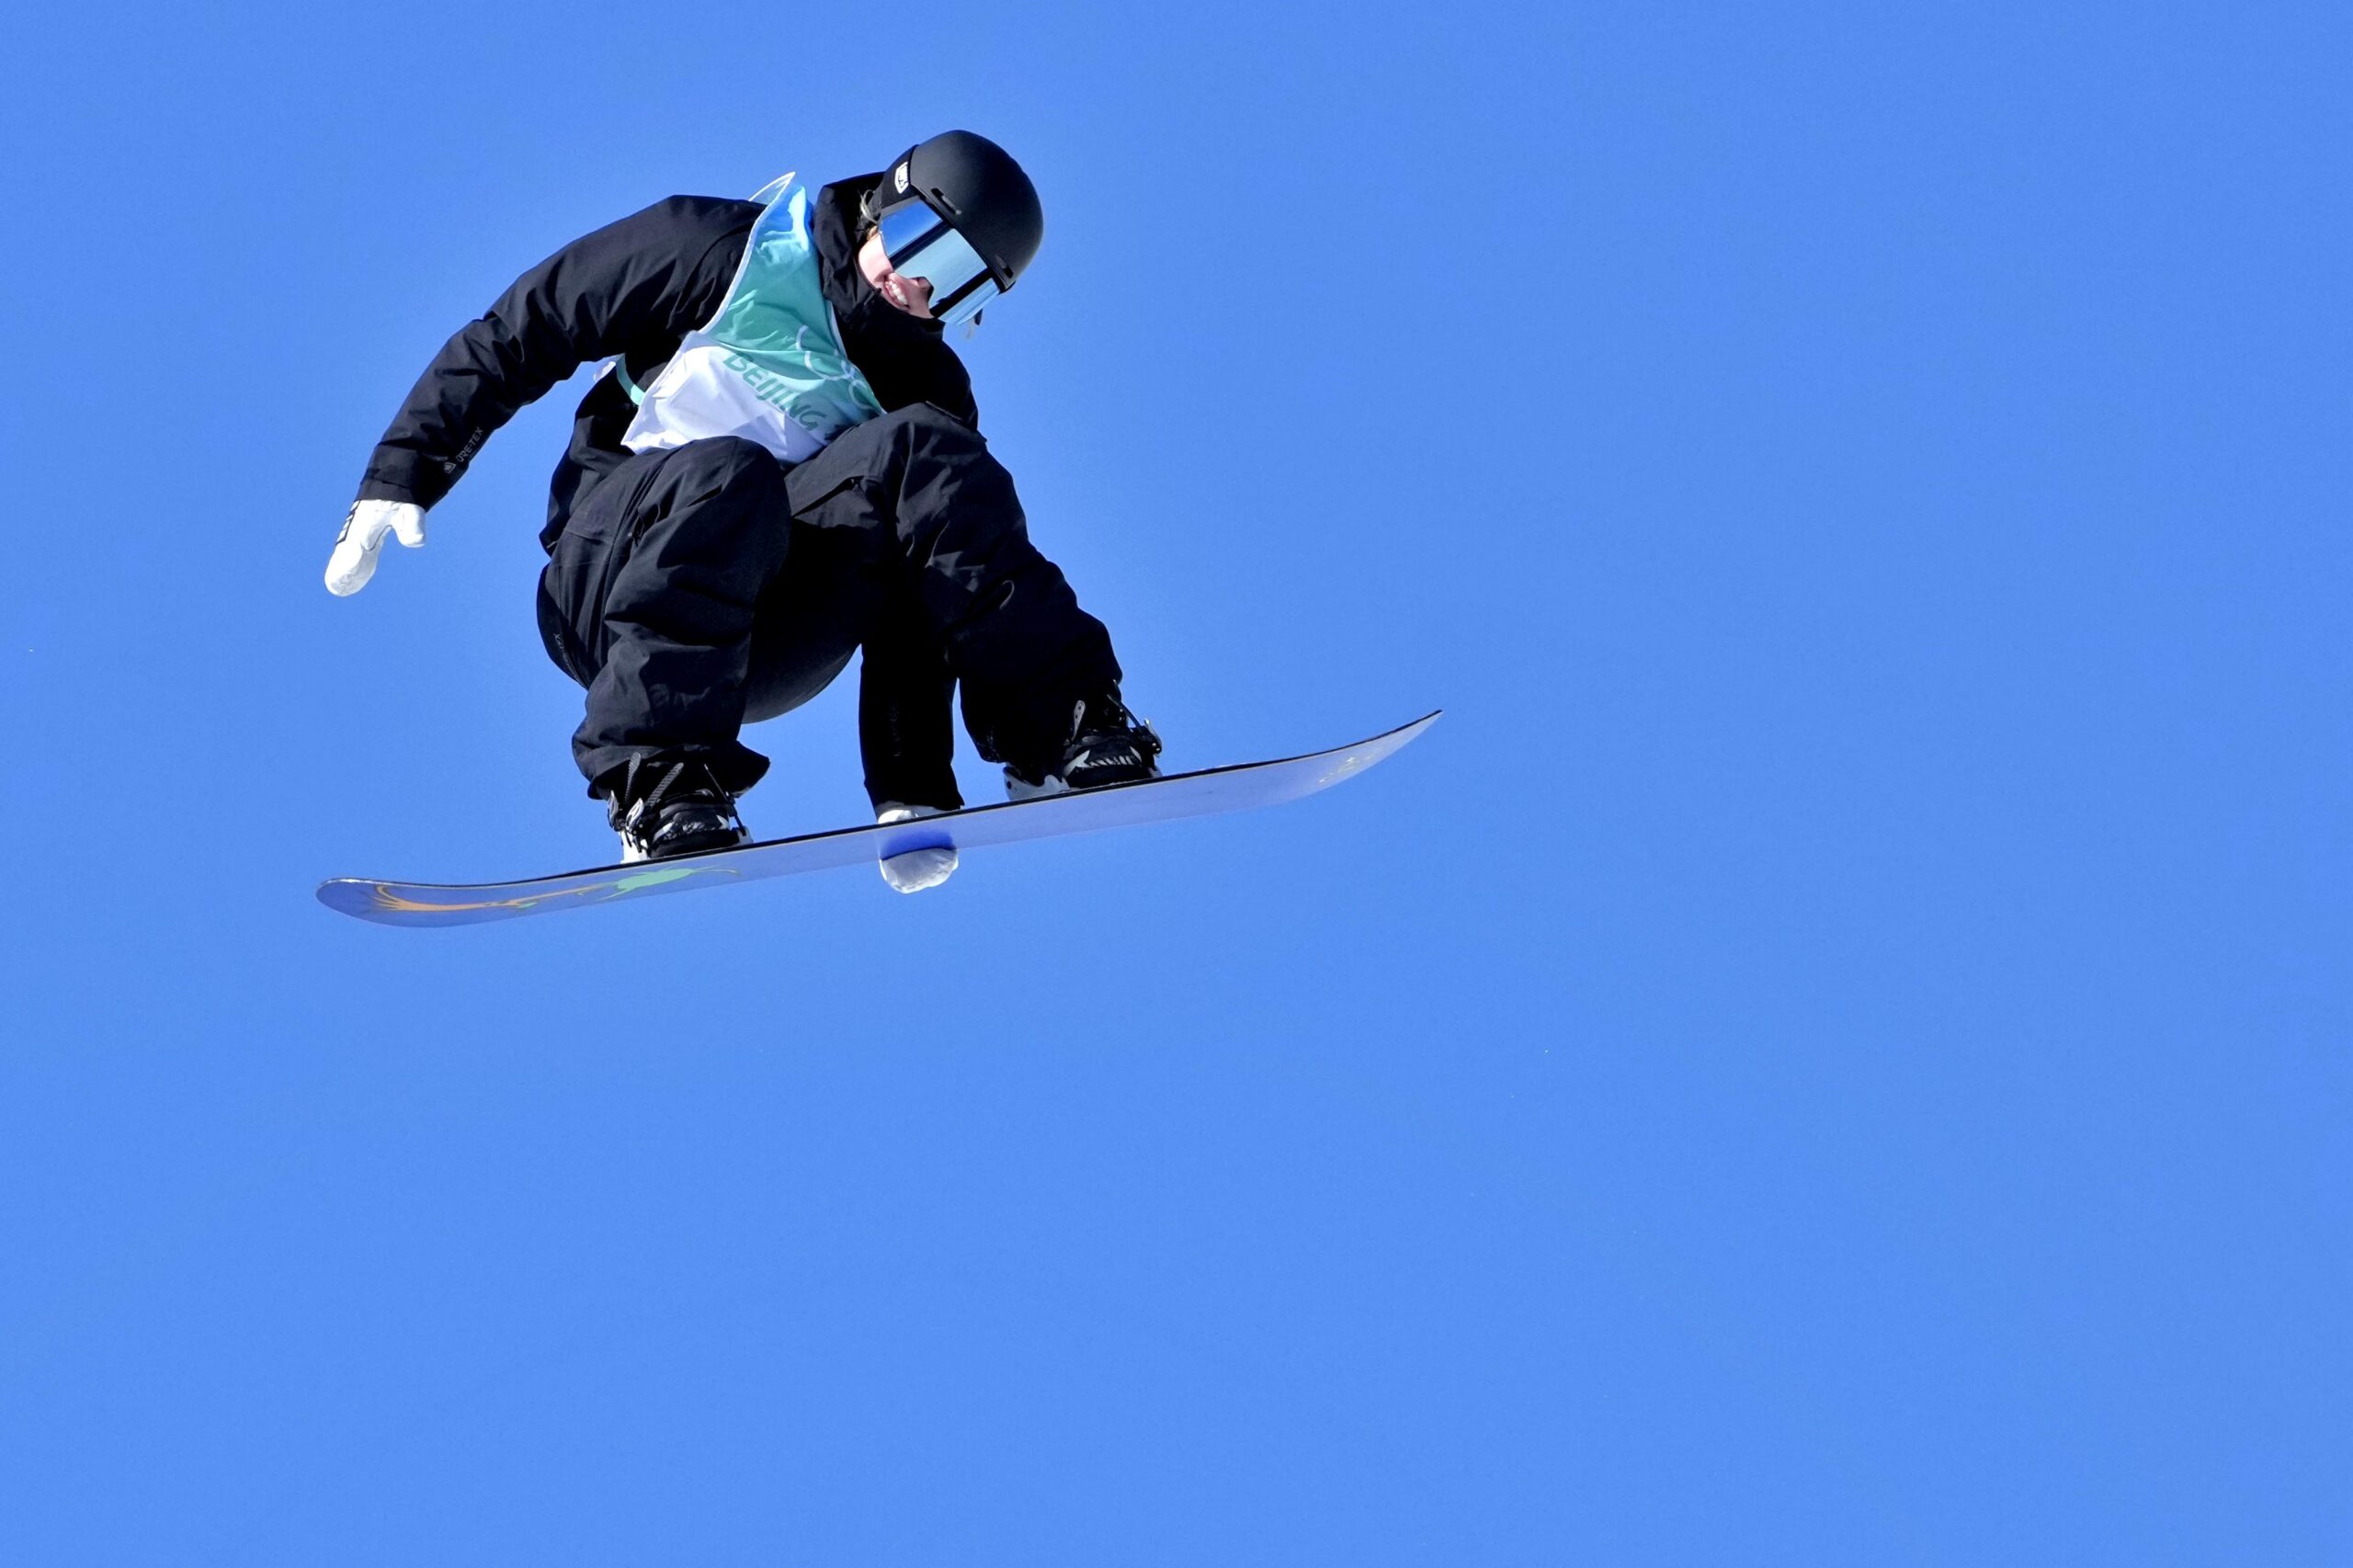 Snowboard women’s big air final: live stream, TV channel, time, how to watch the Olympics